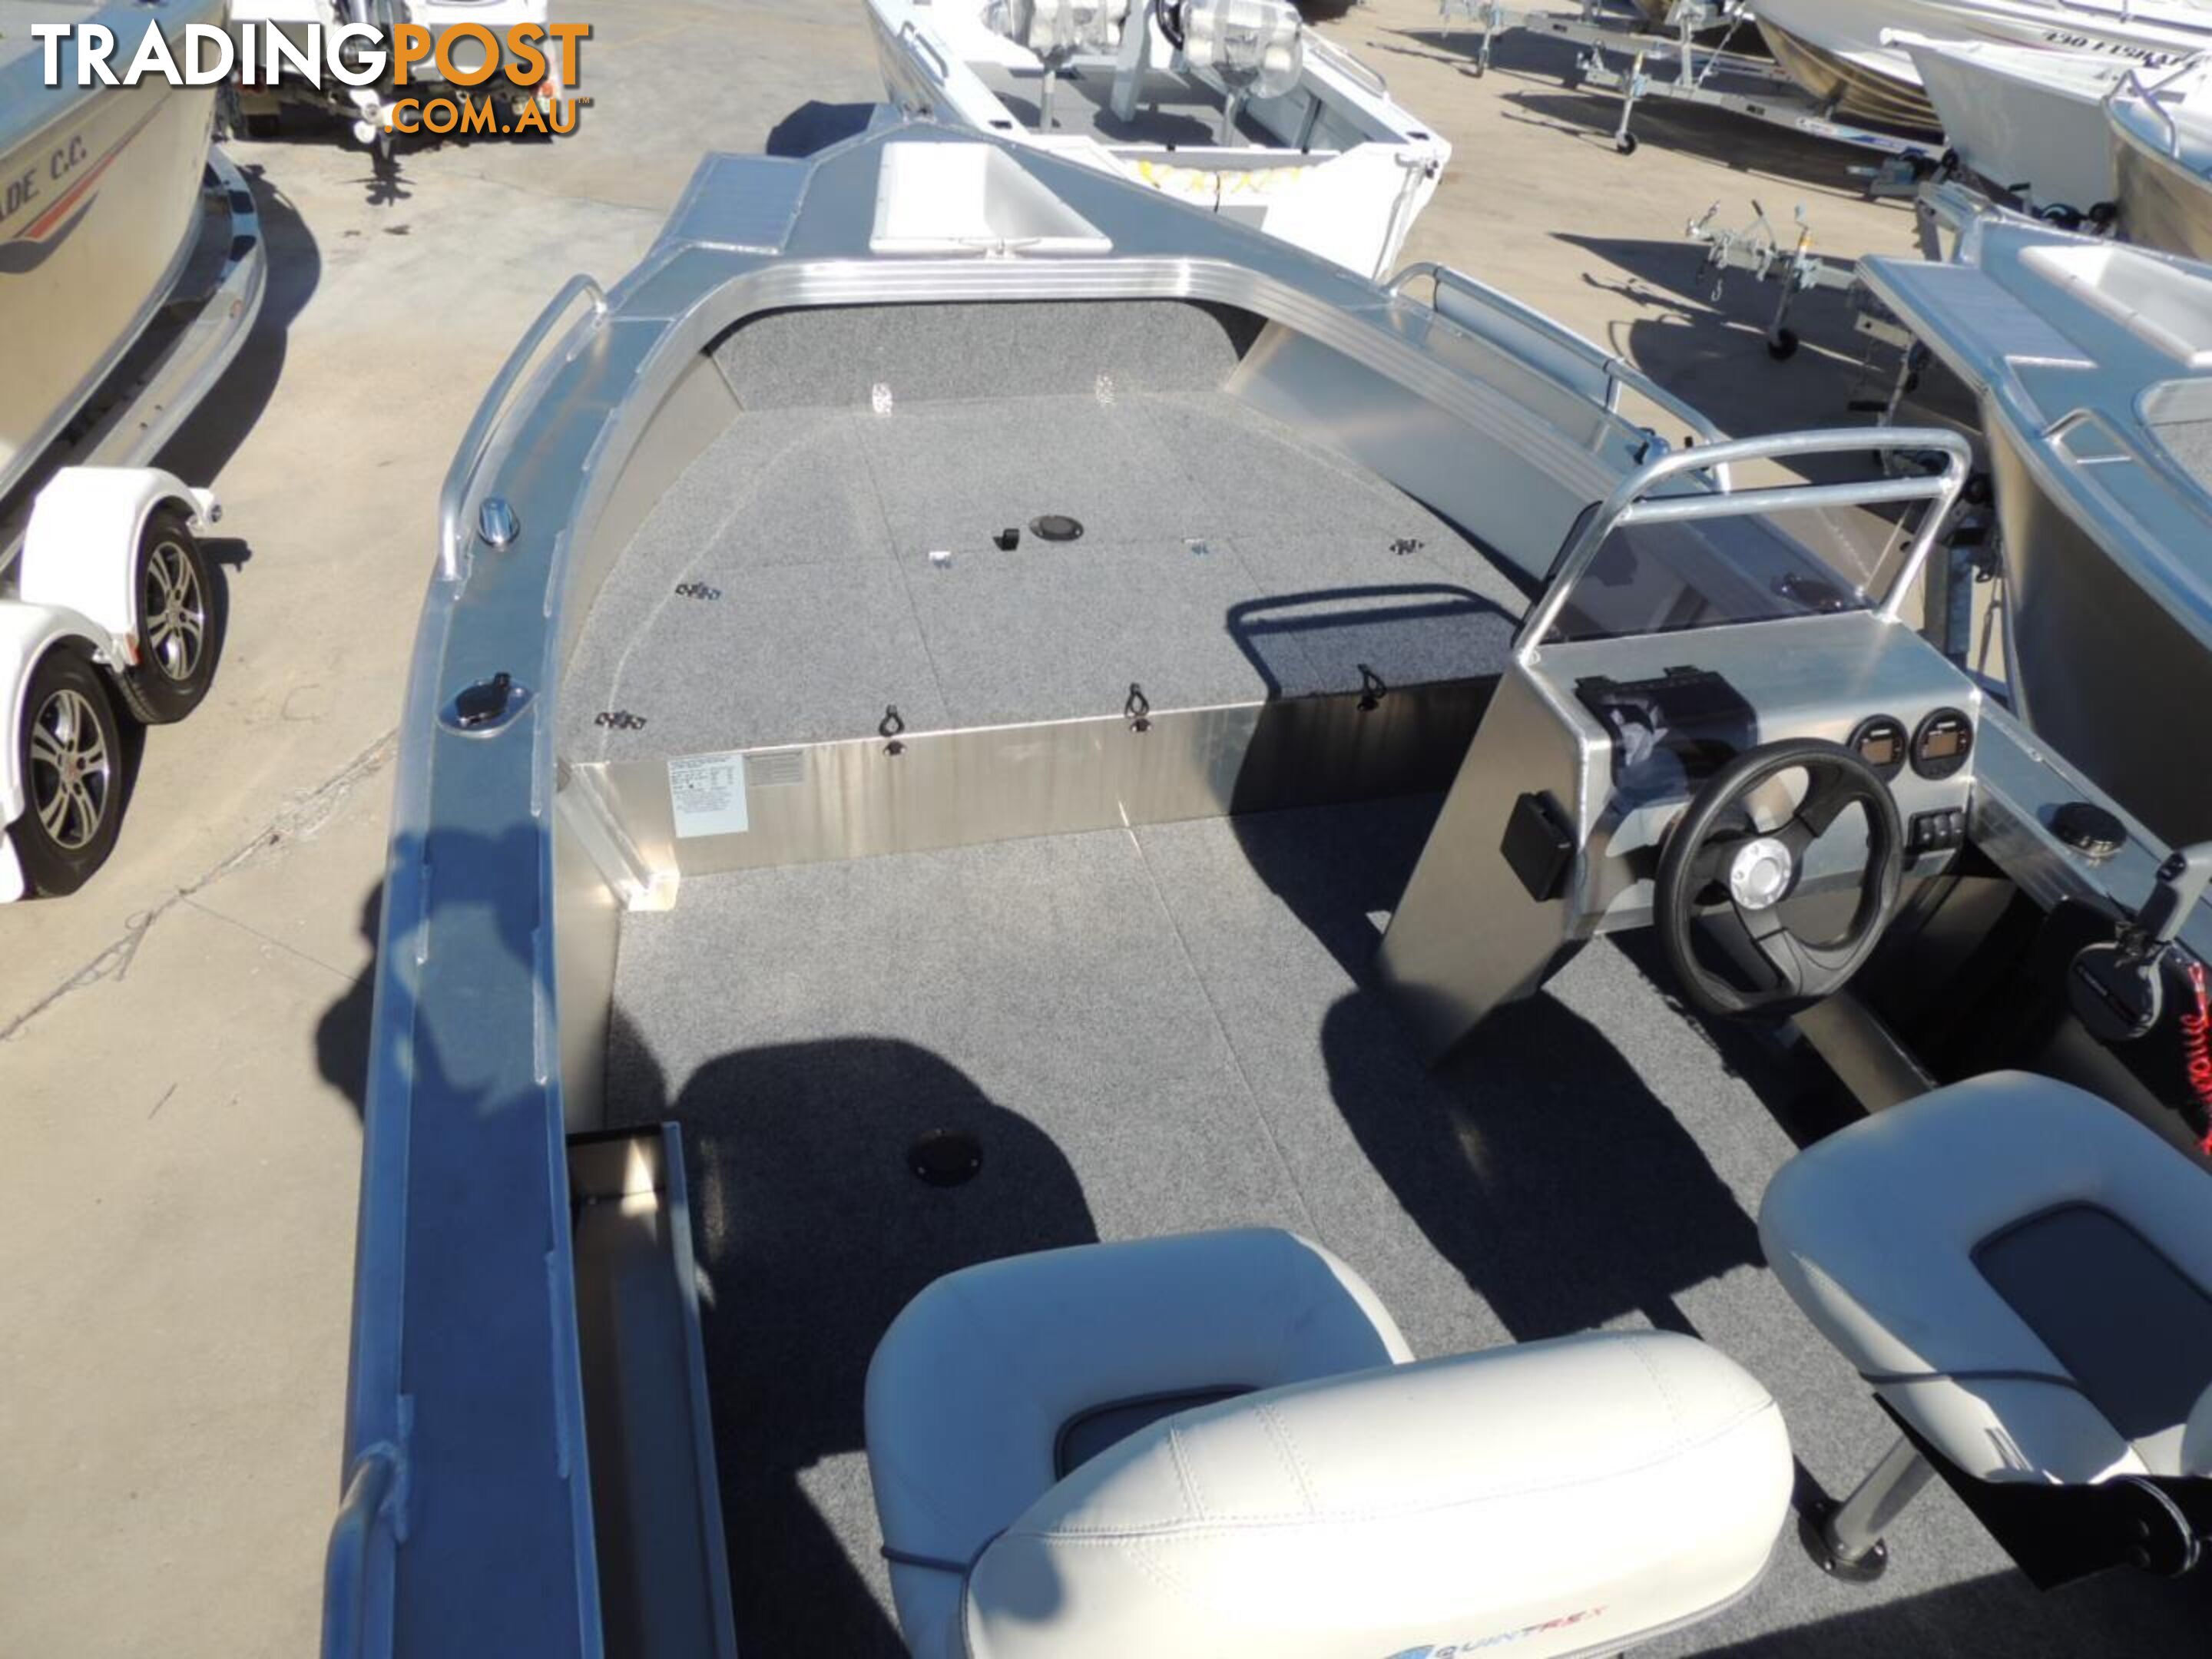 Quintrex 440 Renegade SC(Side Console) + Yamaha F60hp 4-stroke - Pack 3 for sale online prices